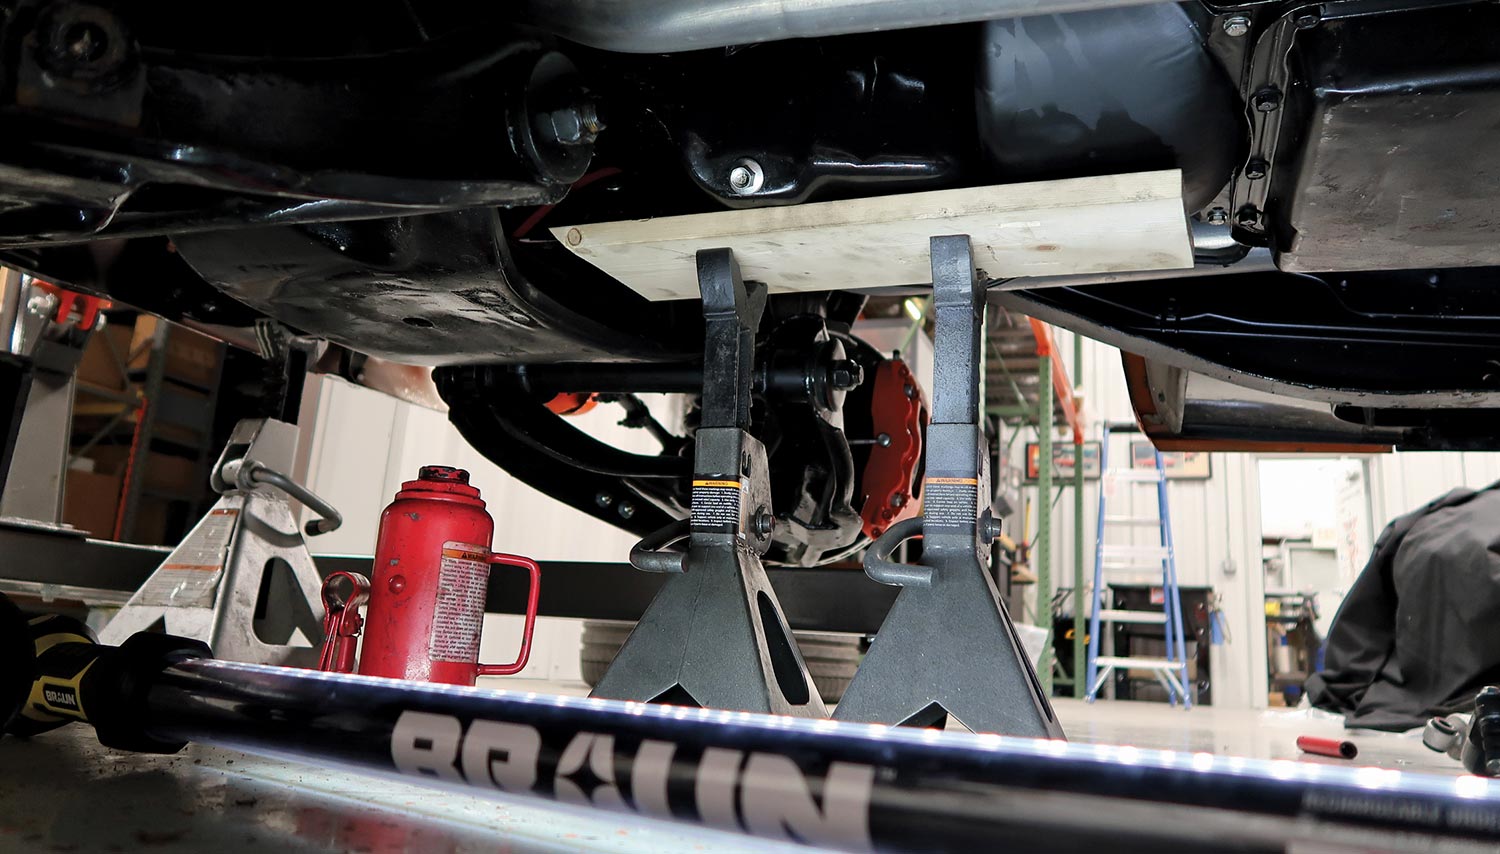 view under the car of the engine supported by a wood block on a pair of jackstands